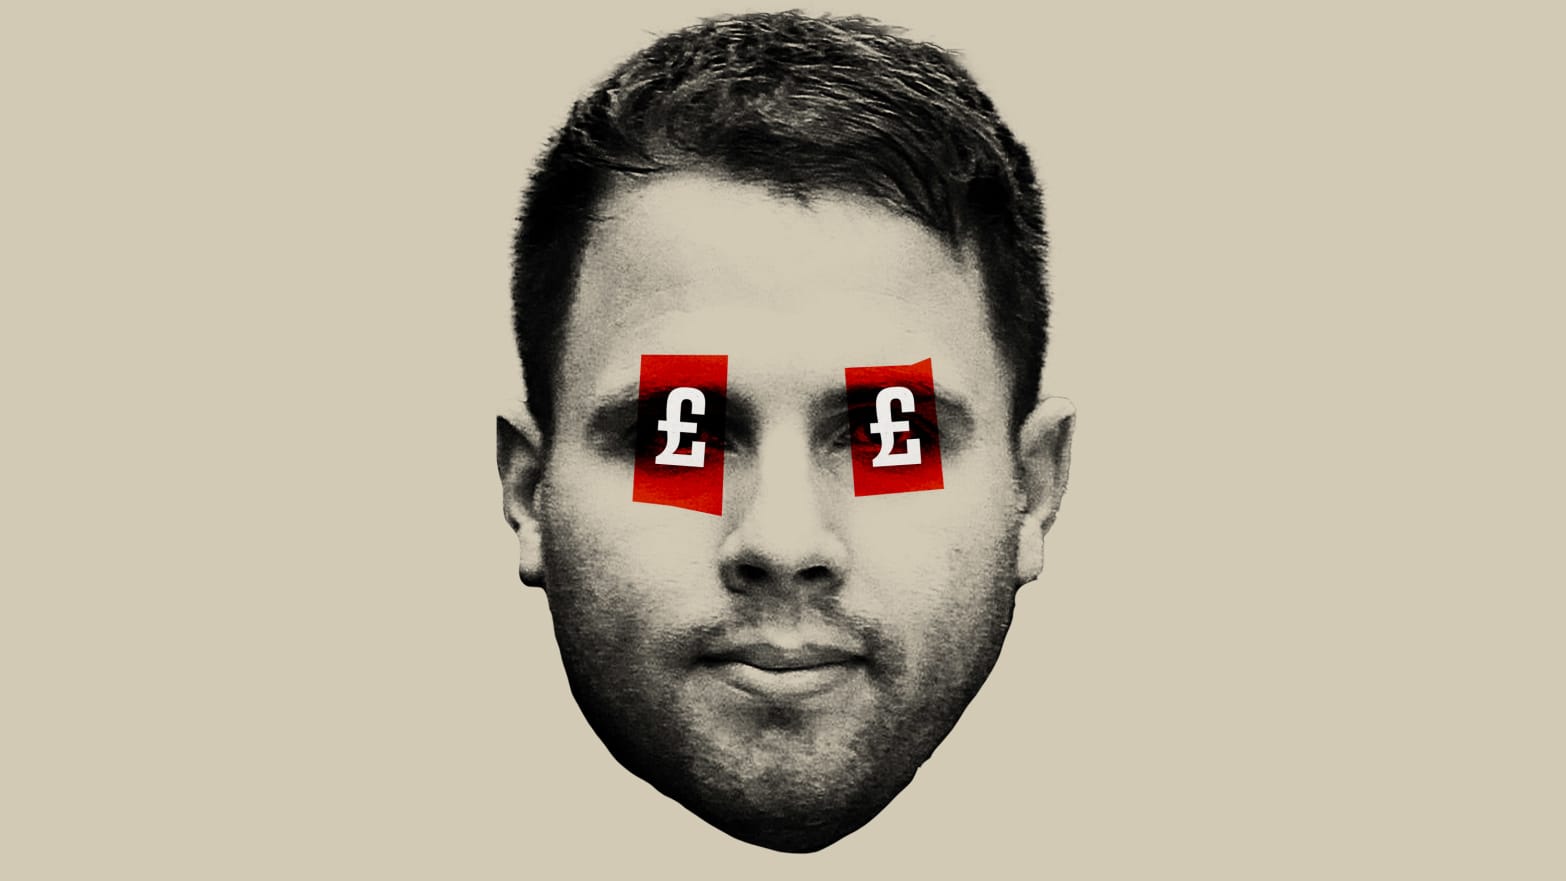 An illustration showing tabloid journo Dan Wootton, who is facing sordid ‘double life’ claims.